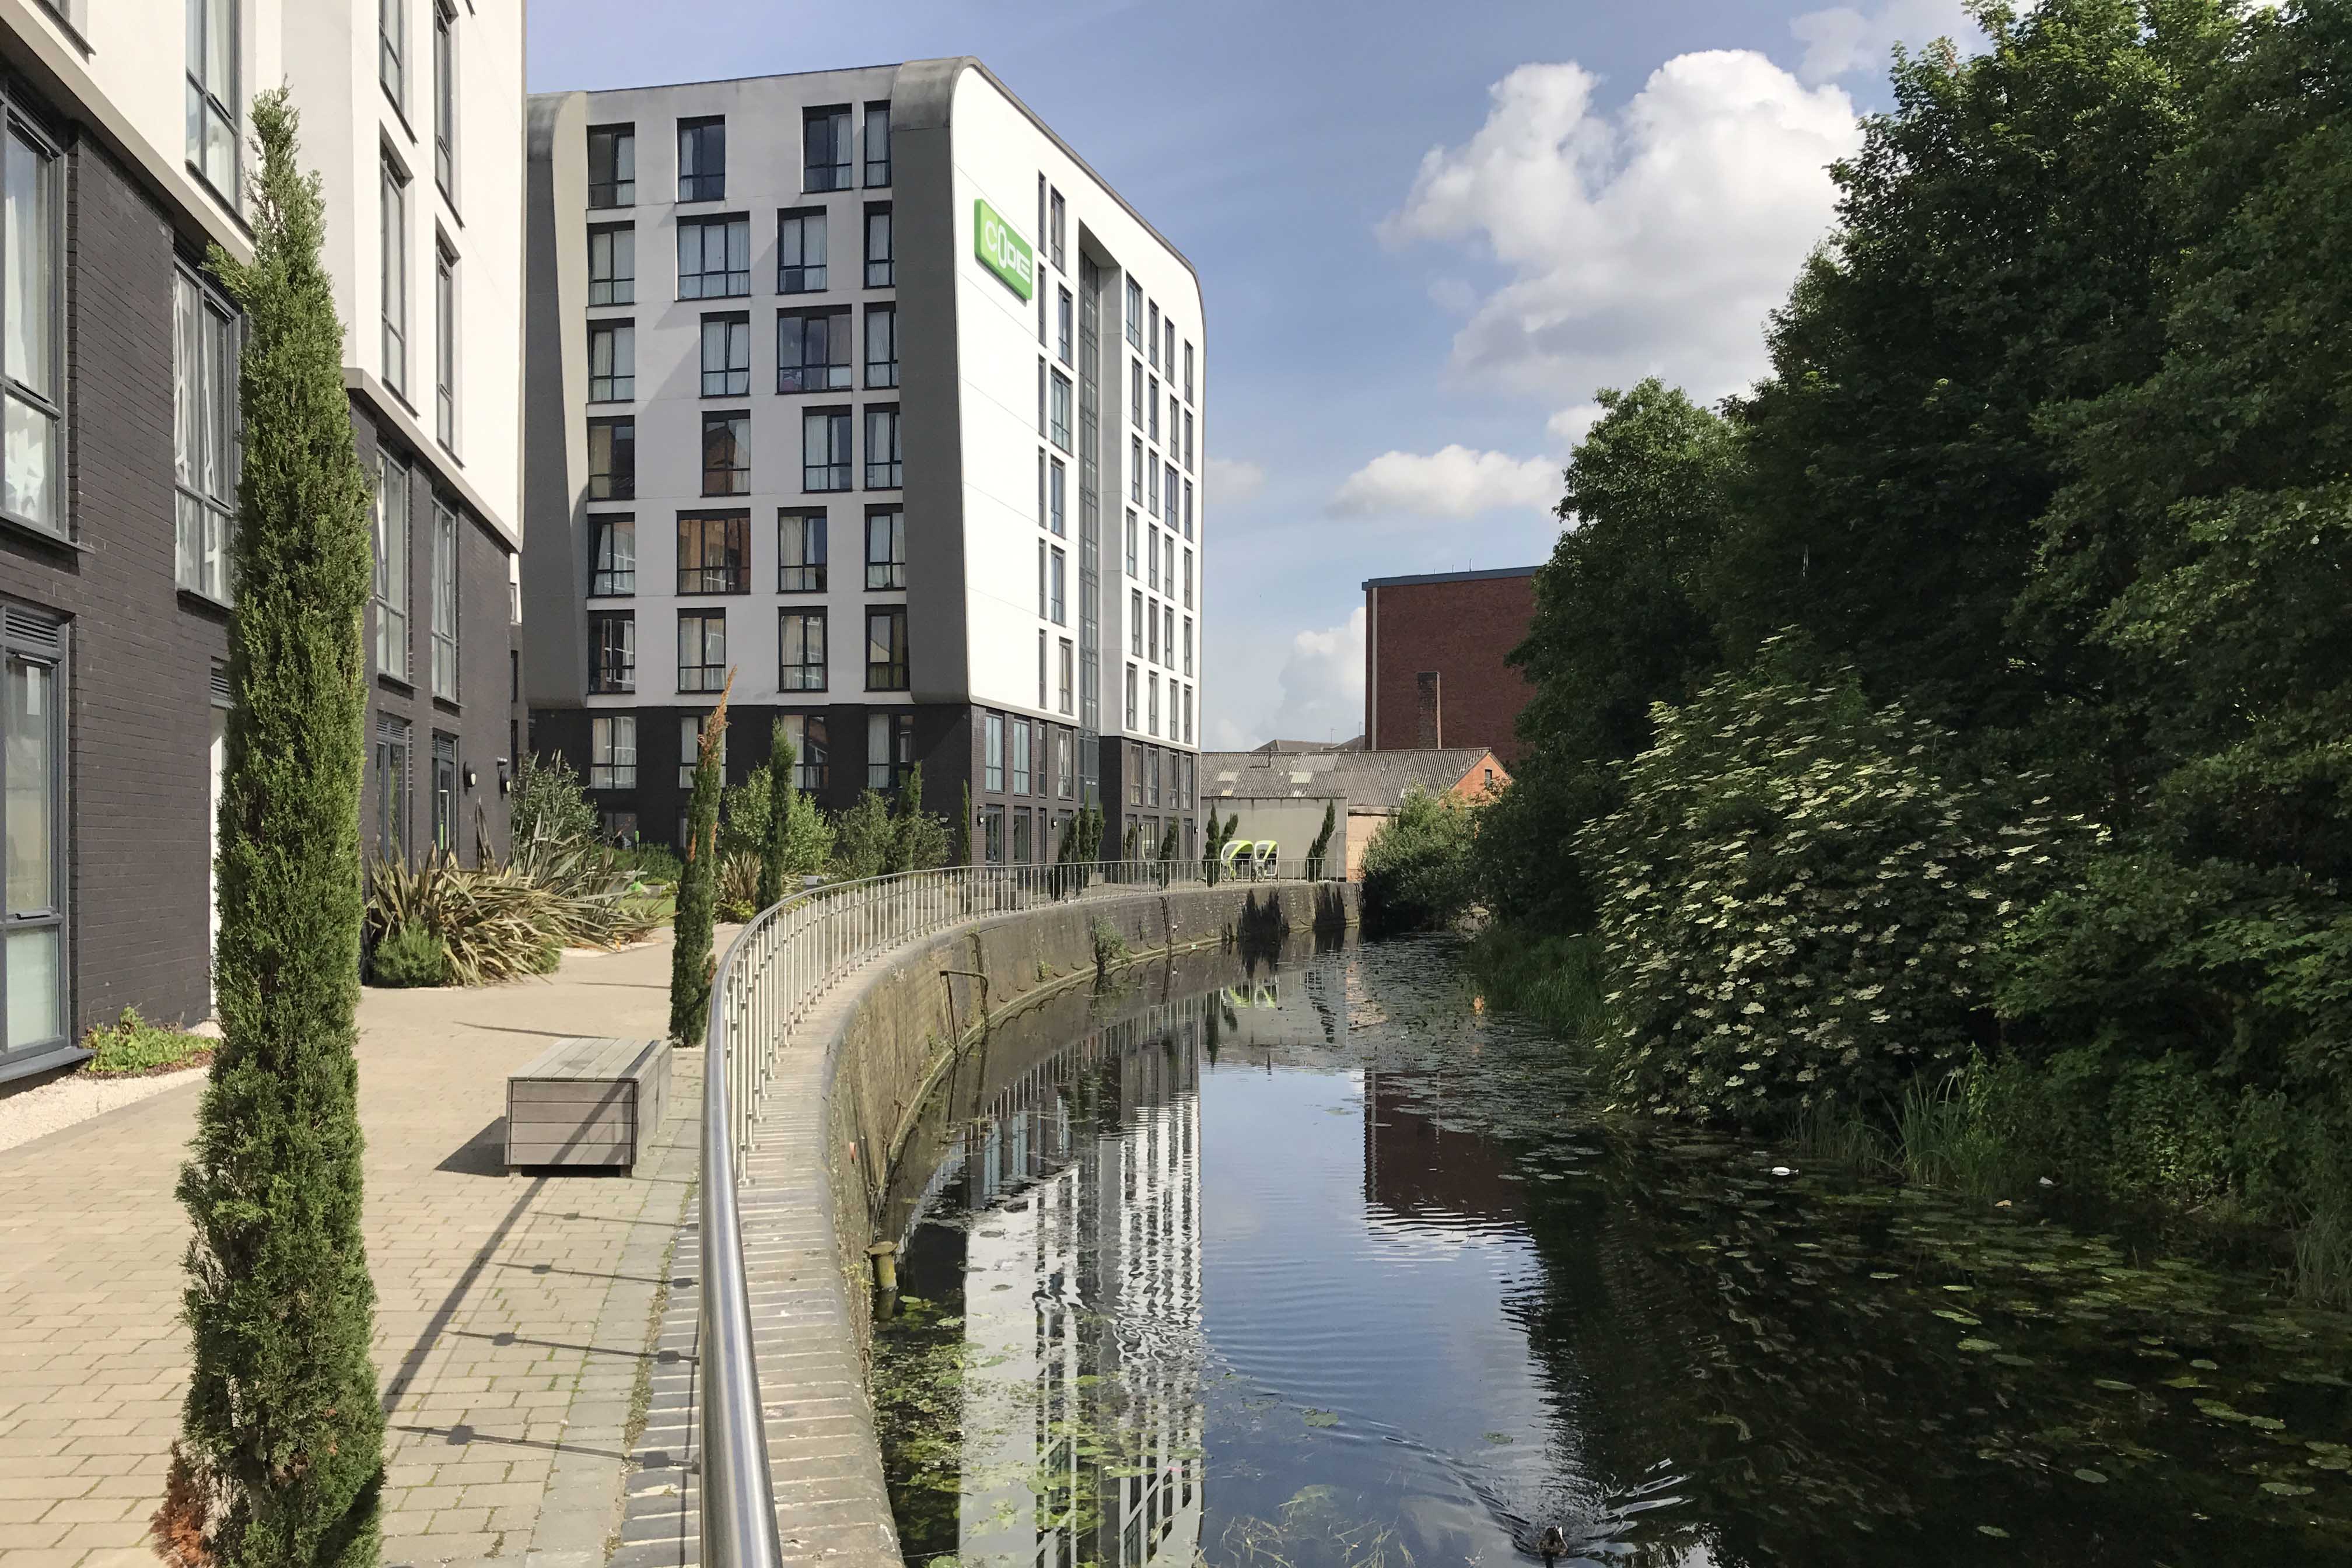 Riverside location at CODE Student Accommodation Leicester